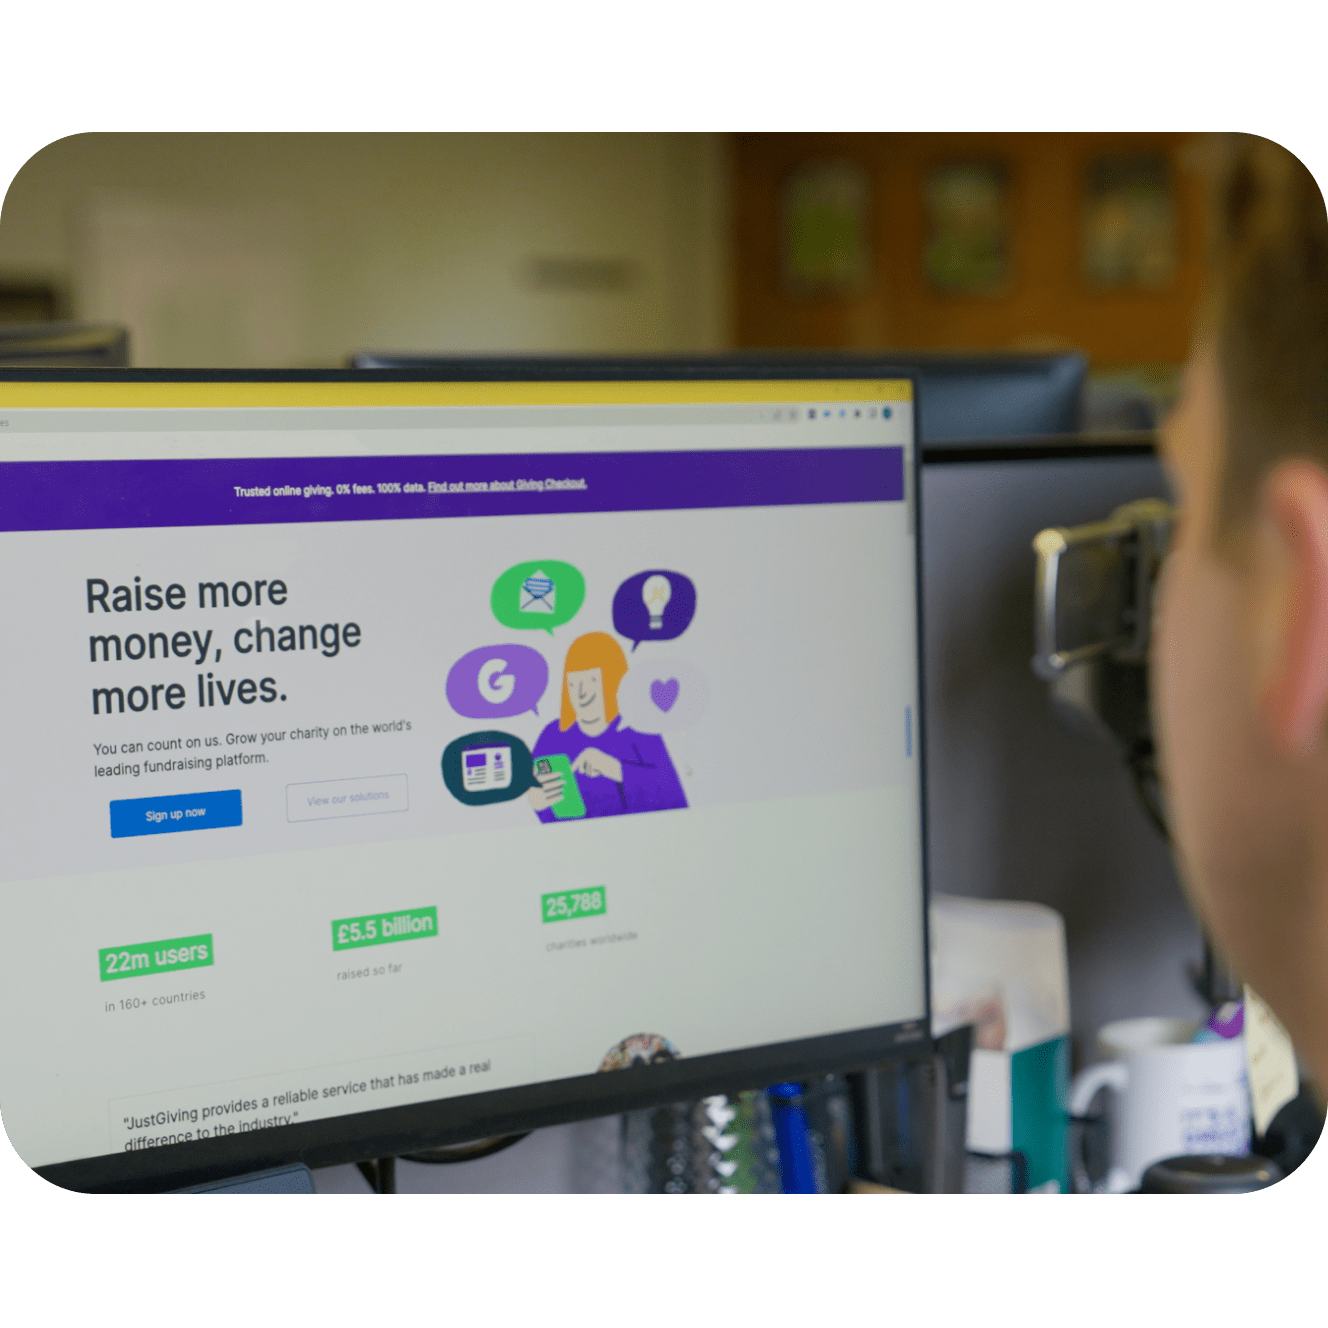 Creating change, one payment at a time